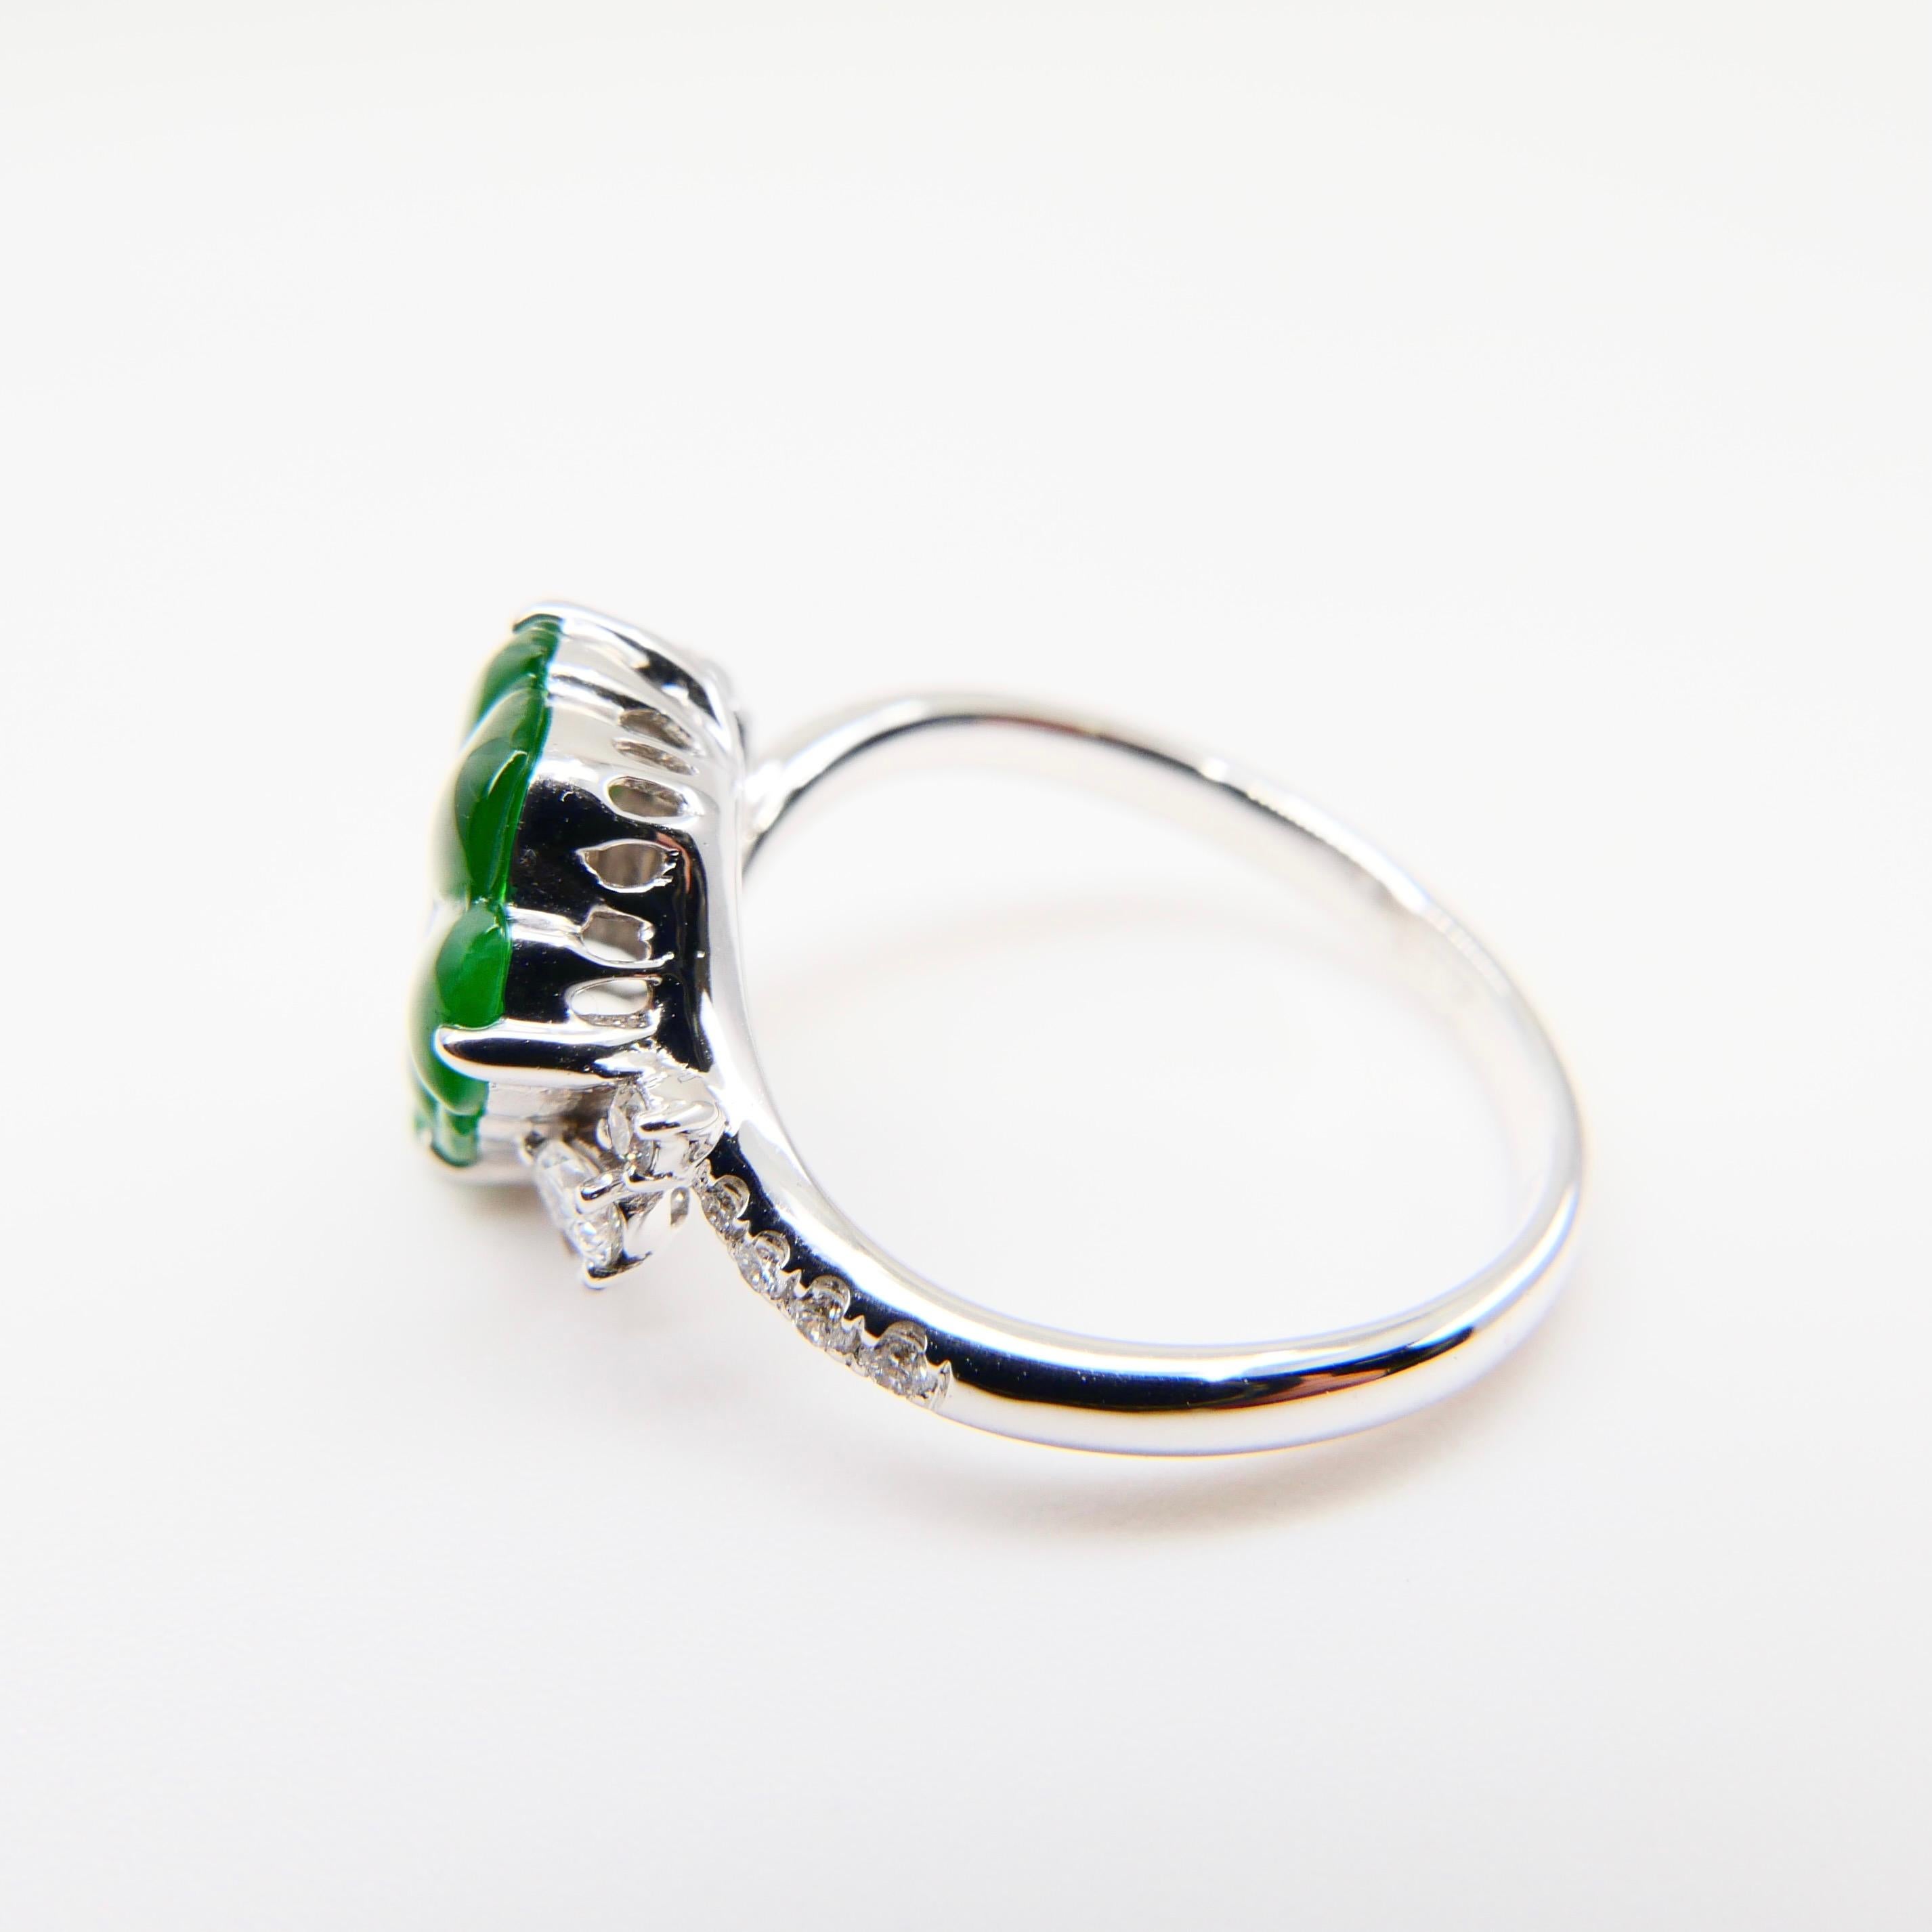 Certified Type A Jadeite Jade and Diamond Cocktail Ring, Best Imperial Green In New Condition For Sale In Hong Kong, HK